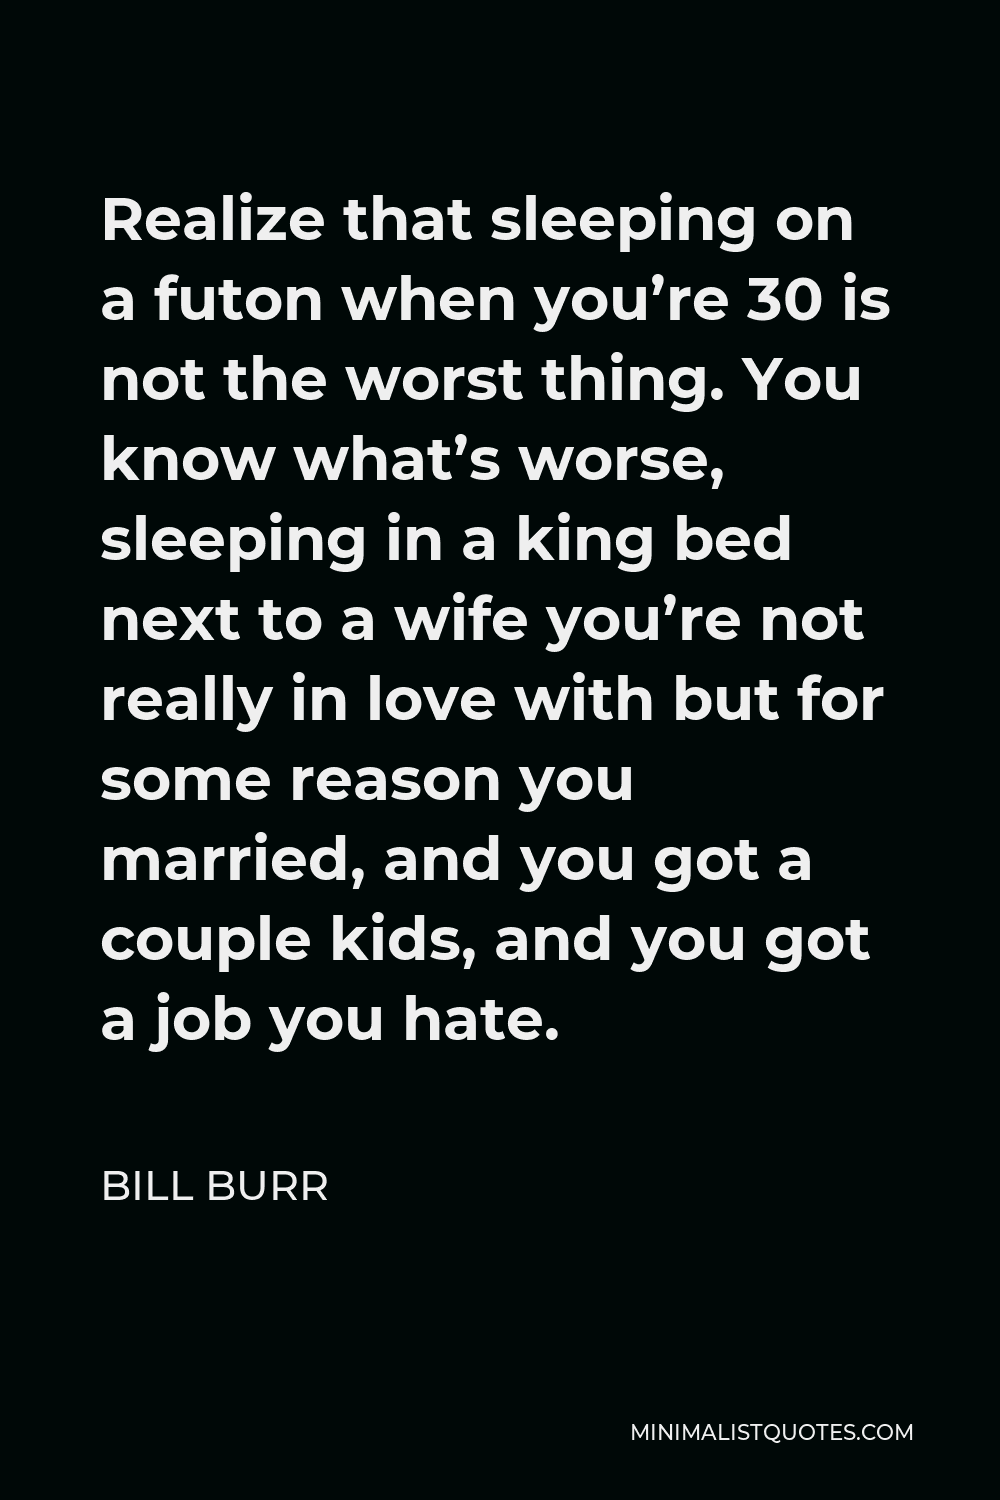 Bill Burr Quote - Realize that sleeping on a futon when you’re 30 is not the worst thing. You know what’s worse, sleeping in a king bed next to a wife you’re not really in love with but for some reason you married, and you got a couple kids, and you got a job you hate.